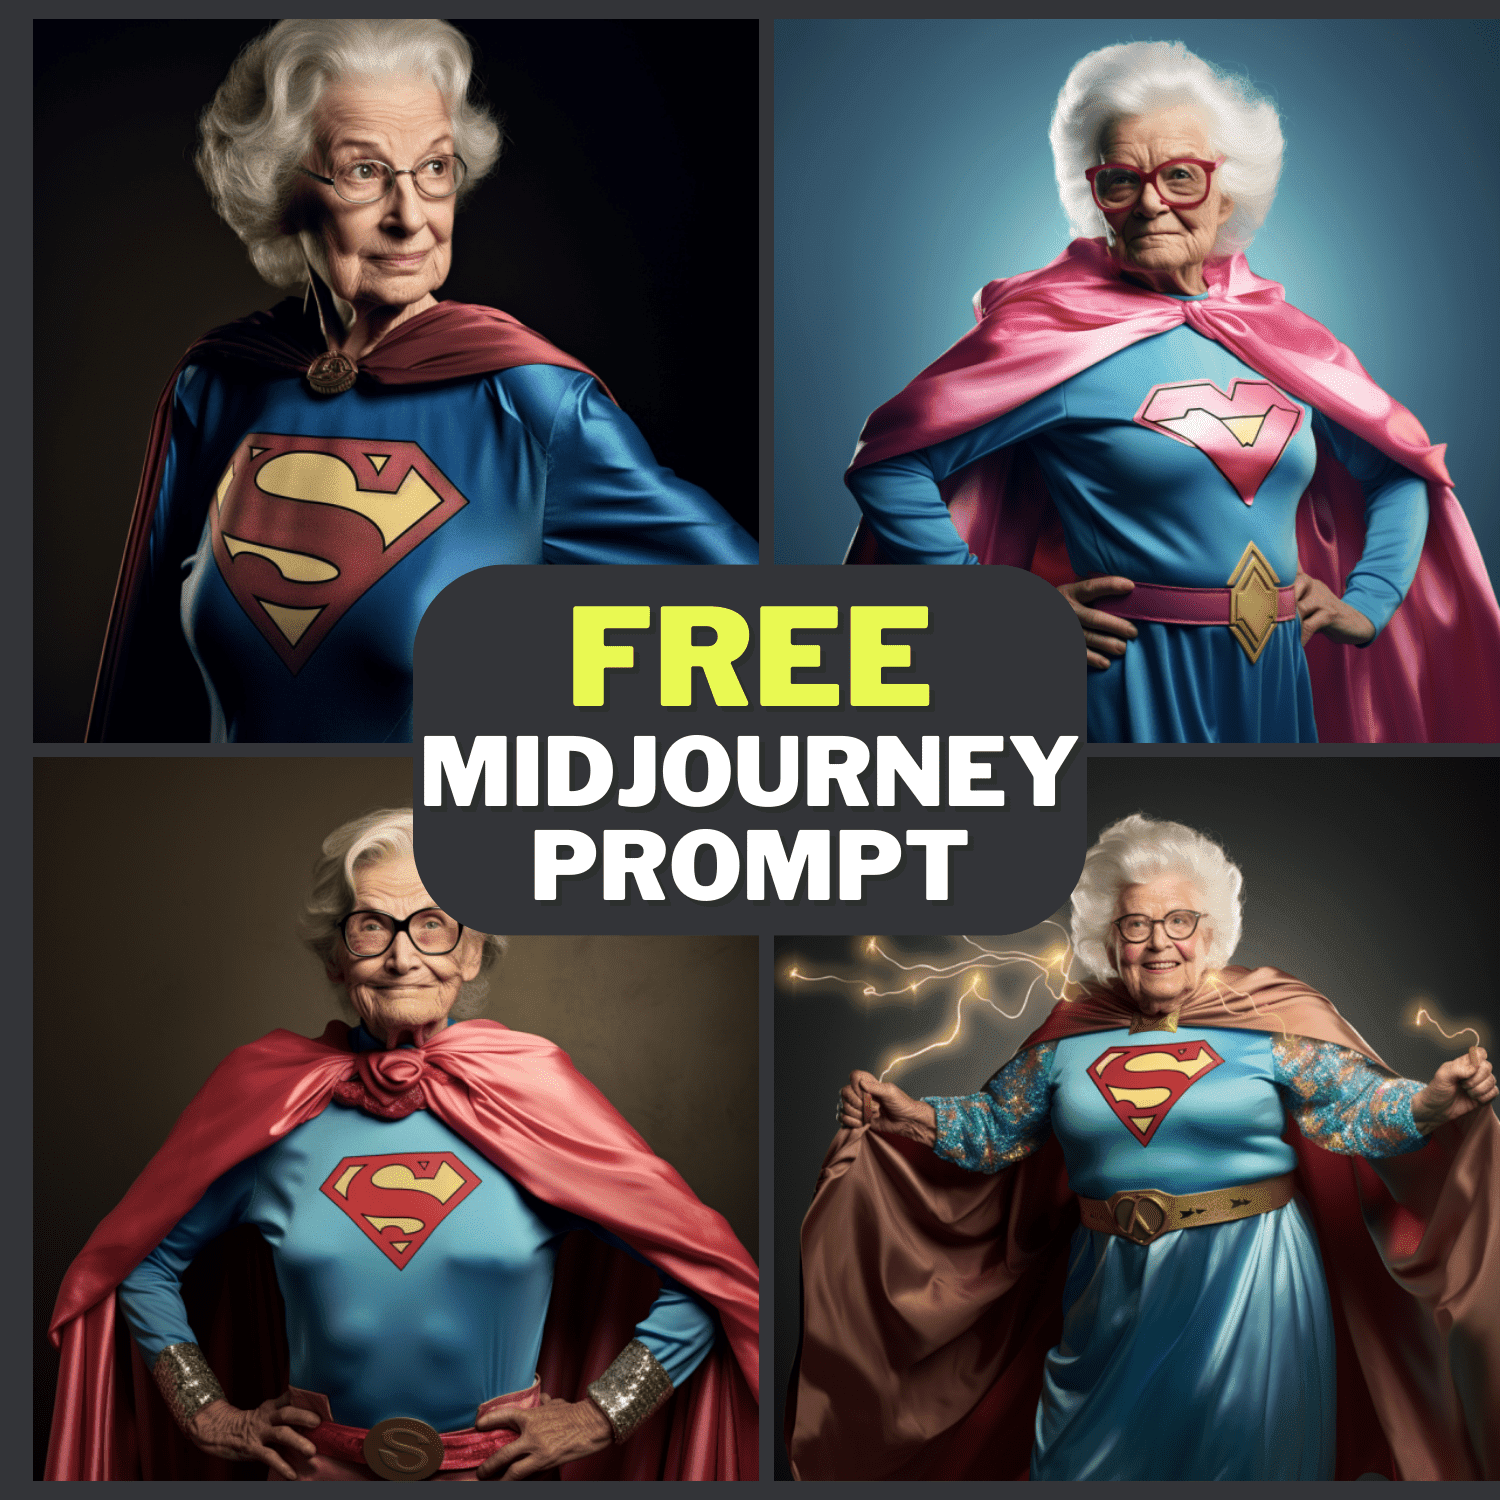 Old Grandma Superhero Commercial Photography Free Midjourney Prompt 1